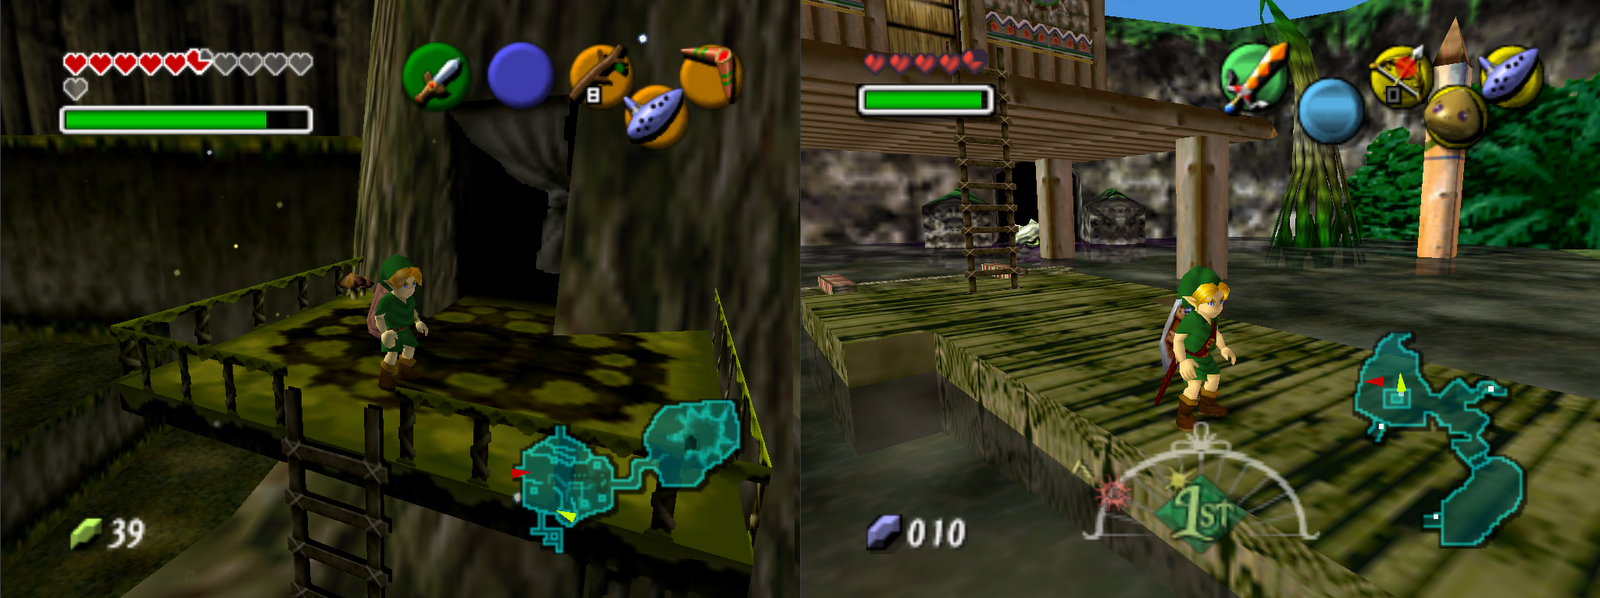 Left: Ocarina of Time; Right: Majora's Mask -- Look at the improved ...